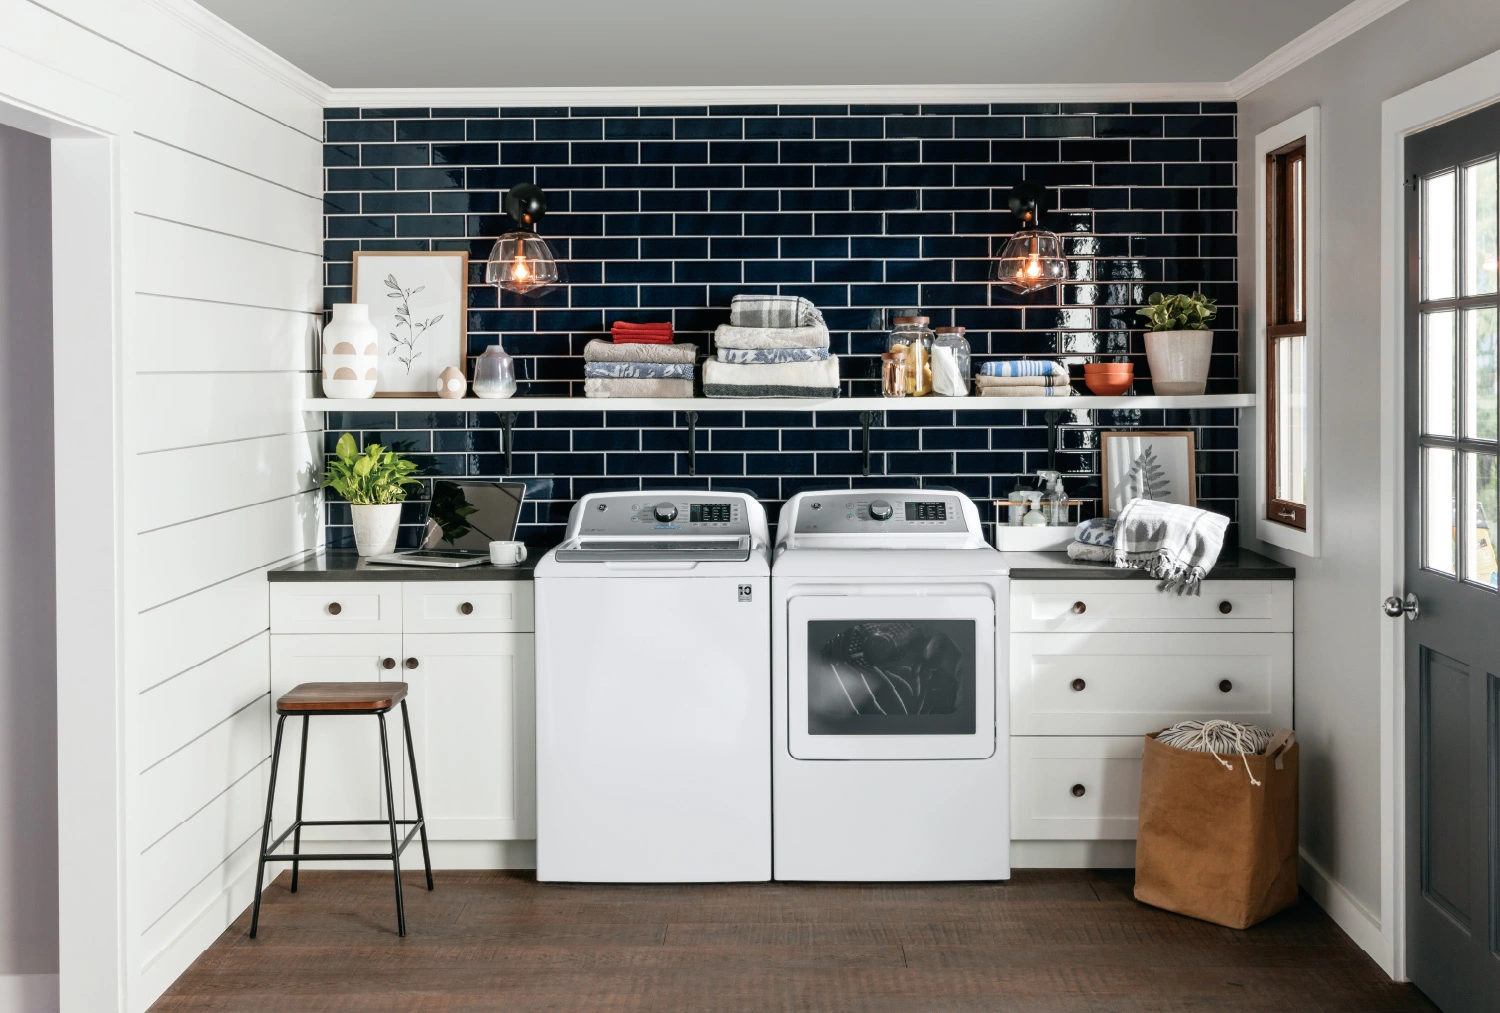 Luxury laundry room design ideas from Coburn’s Kitchen & Bath Showroom. Featuring a washer and dryer set, black tile backsplash, laundry room shelving, cabinets and counter space for additional laundry room storage options.